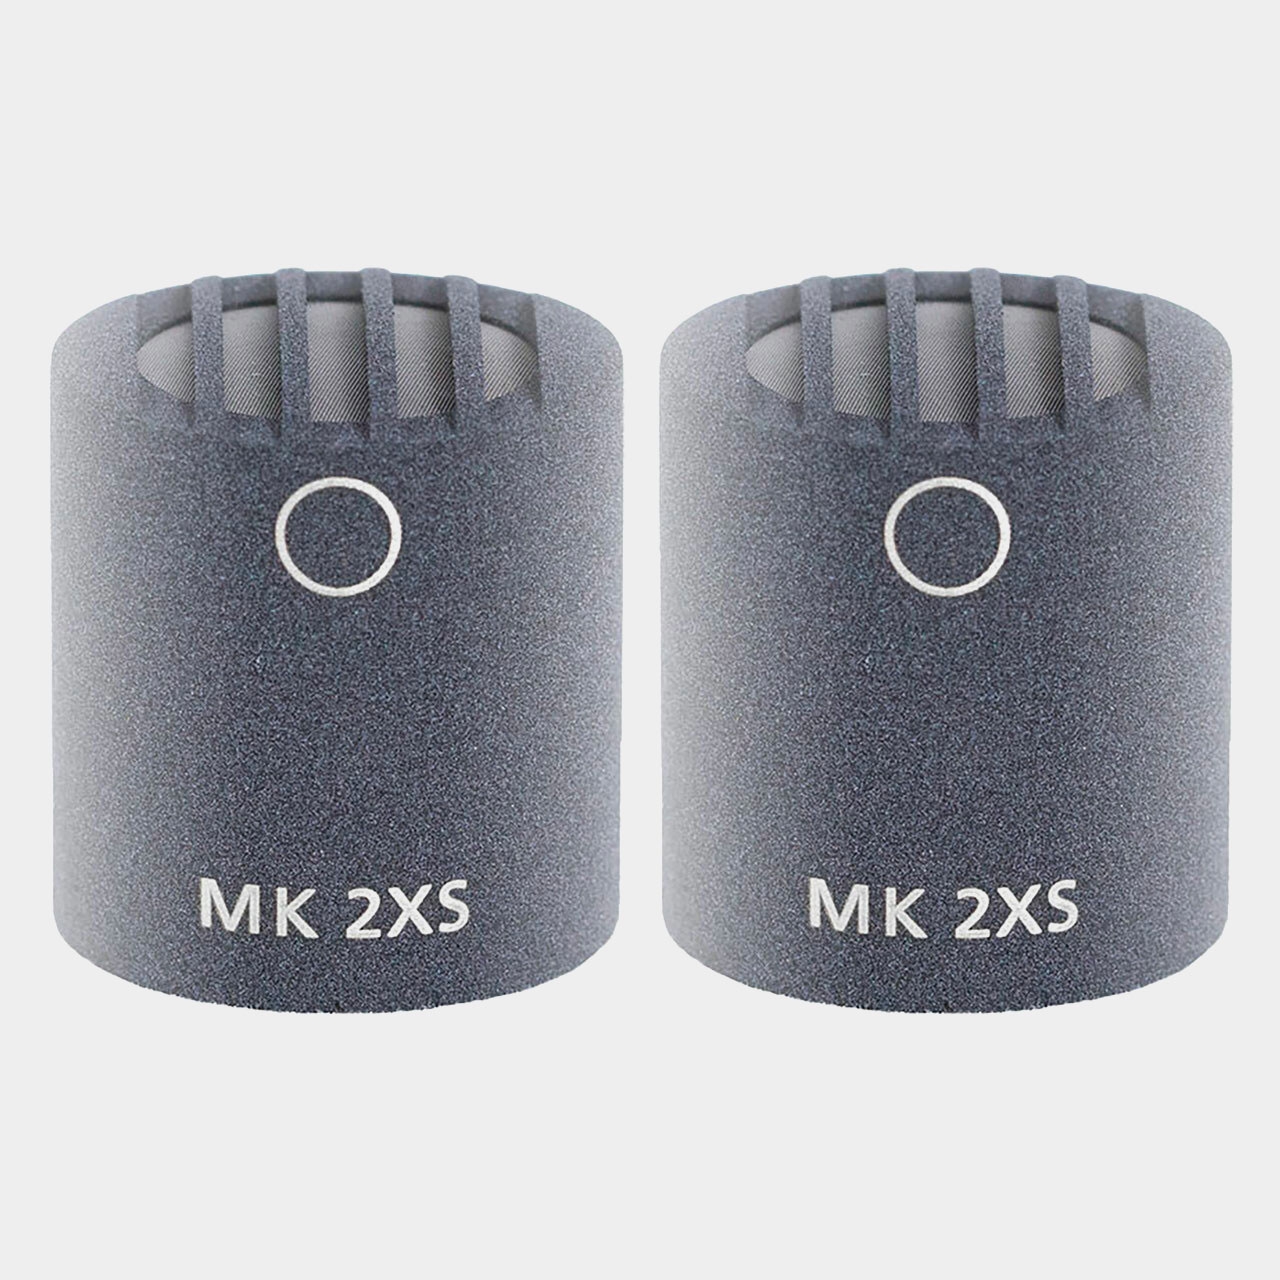 Schoeps MK 2XS Omni Capsule (Matched Pair)